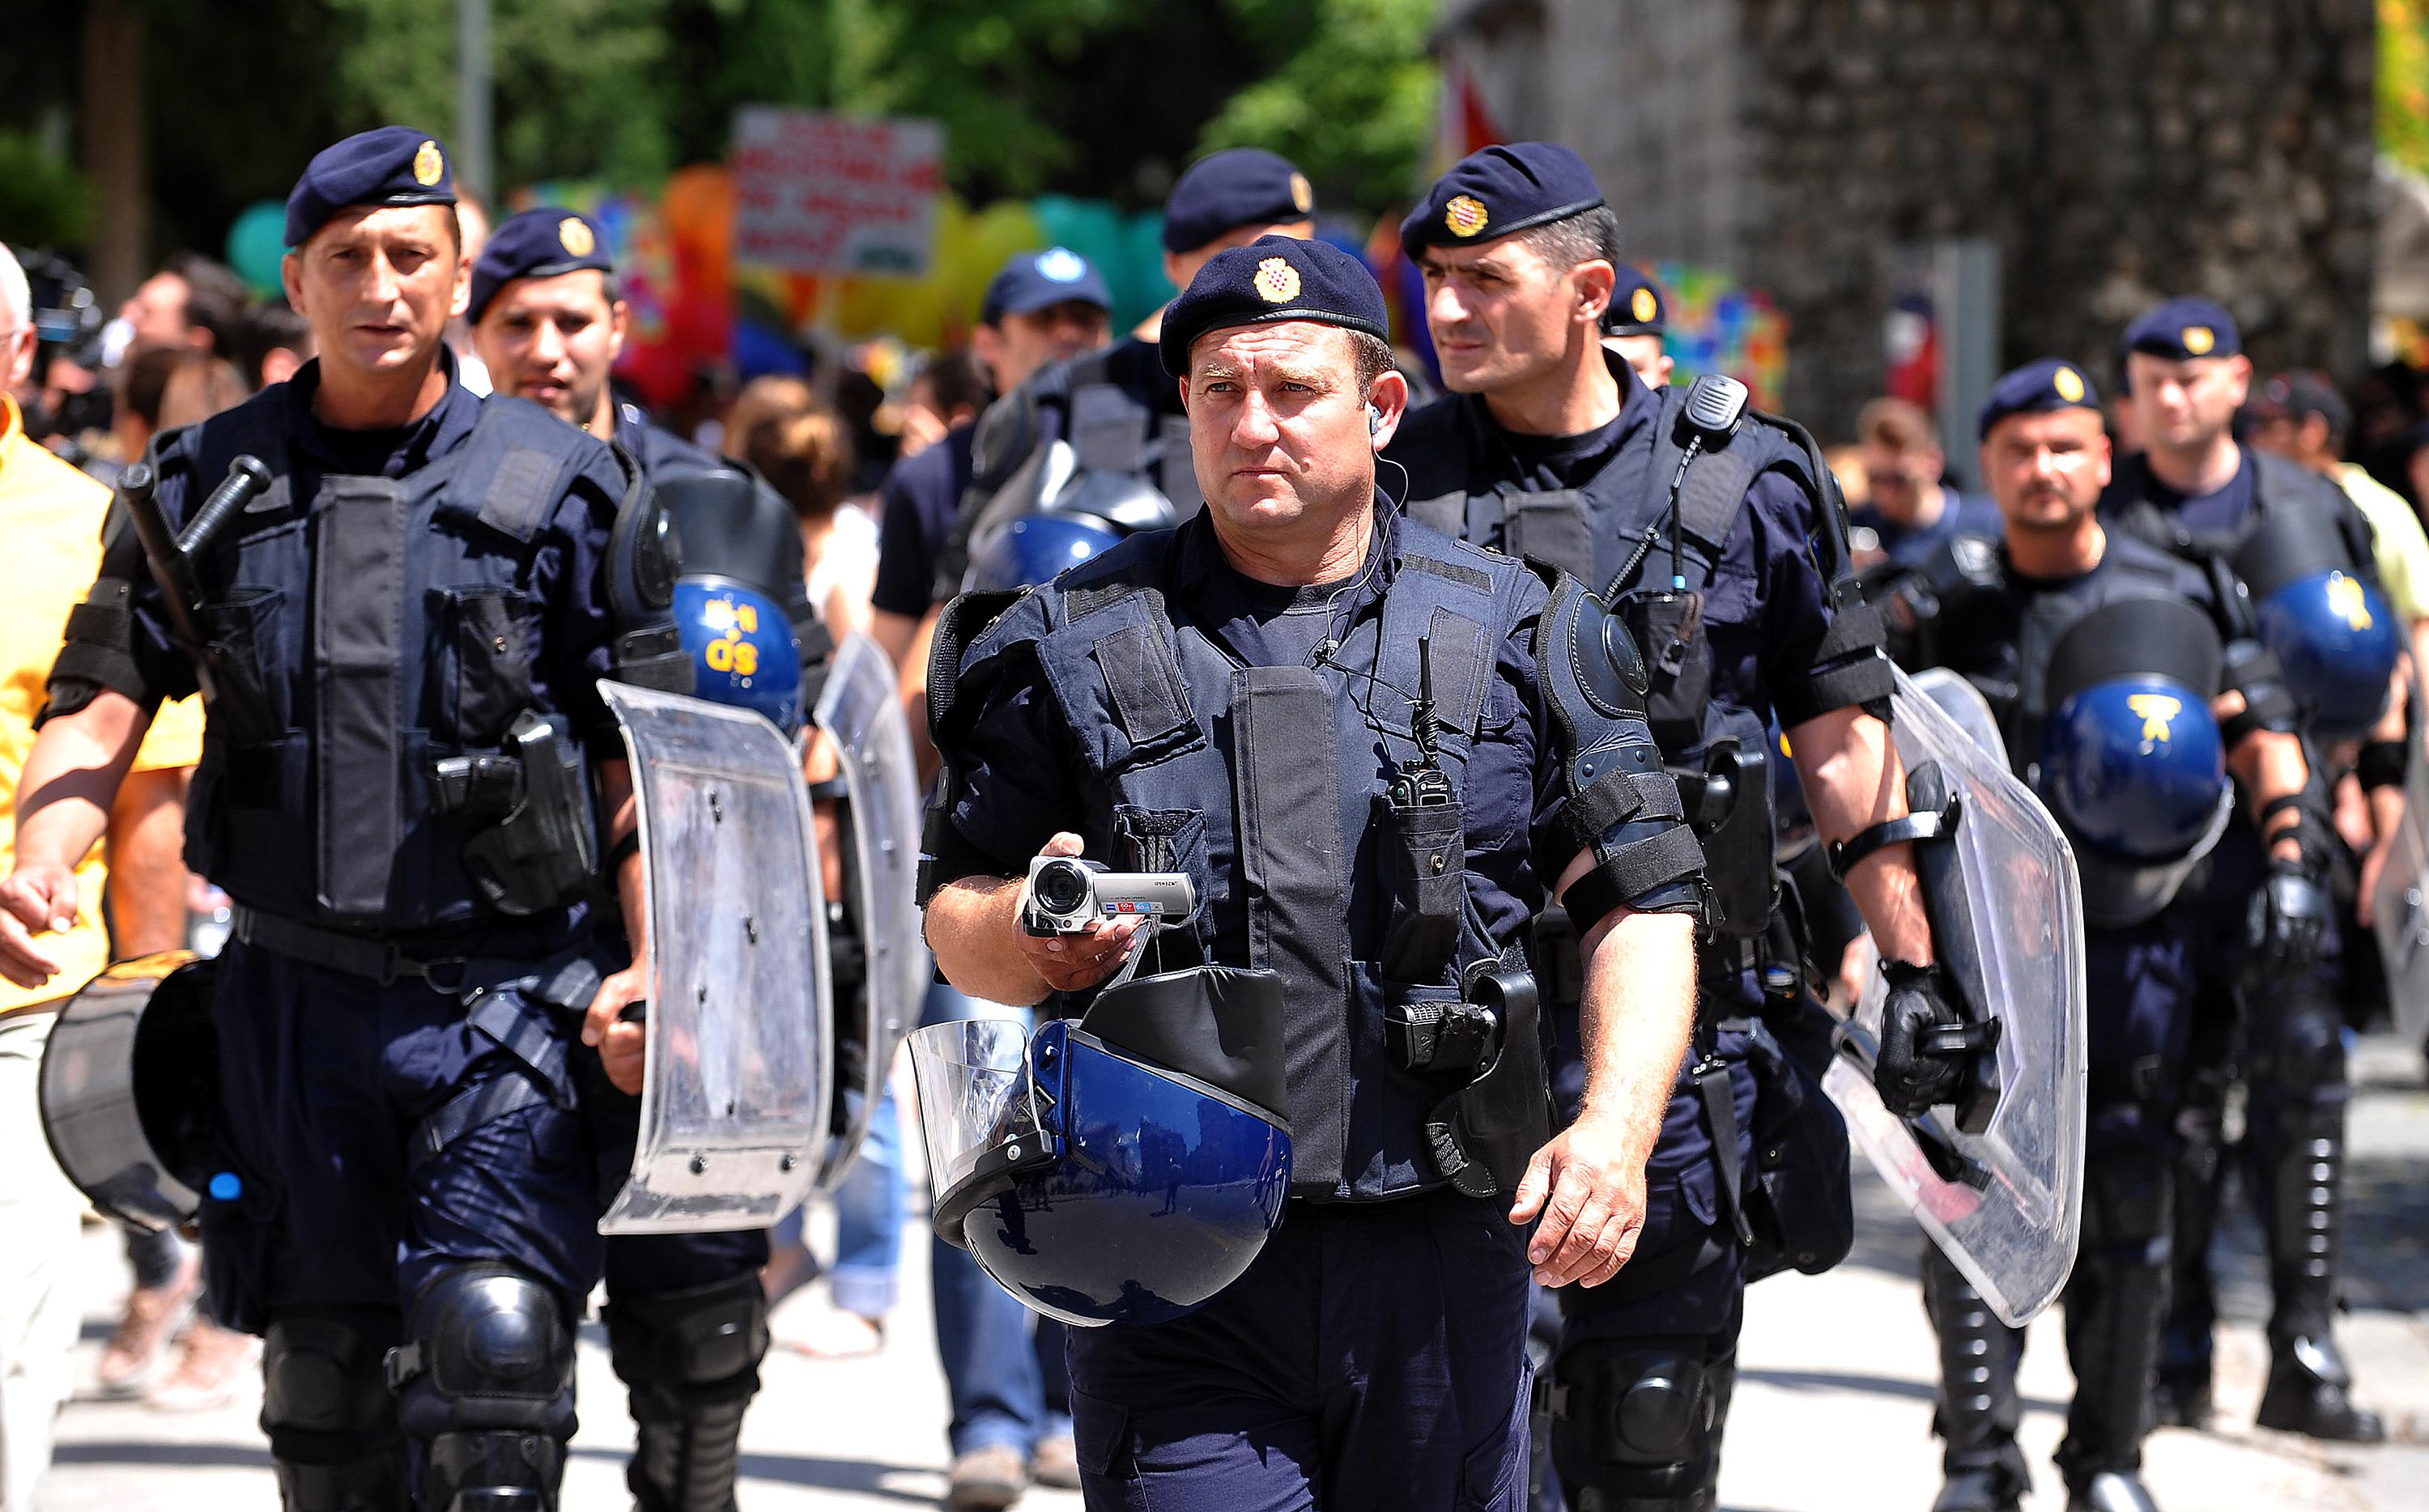 Police officers escort Gay Pride participants in the Croatian coastal city of Split on June 8, 2013.  A few hundred policemen, fully equipped in anti-riot gear, surrounded the 500 or so marchers. 